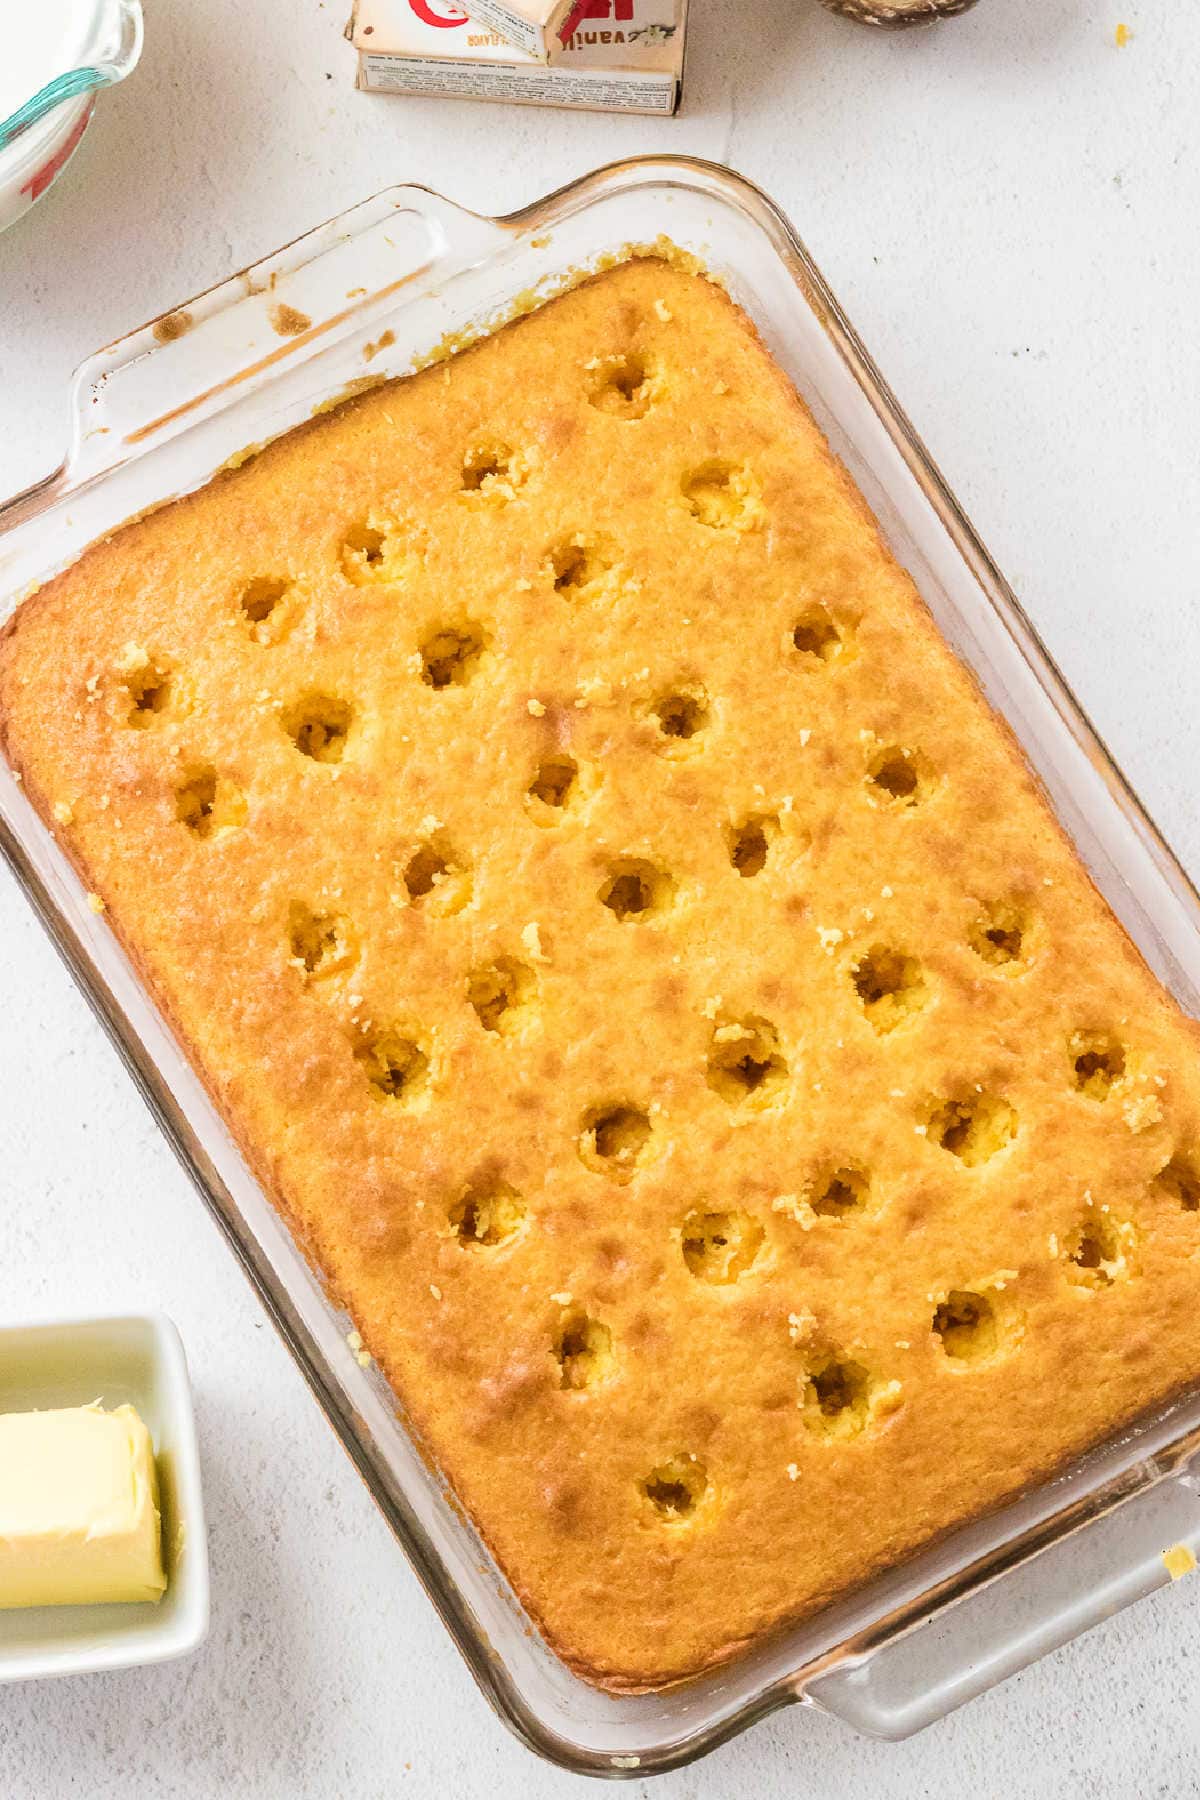 Yellow cake with holes poked in the top.